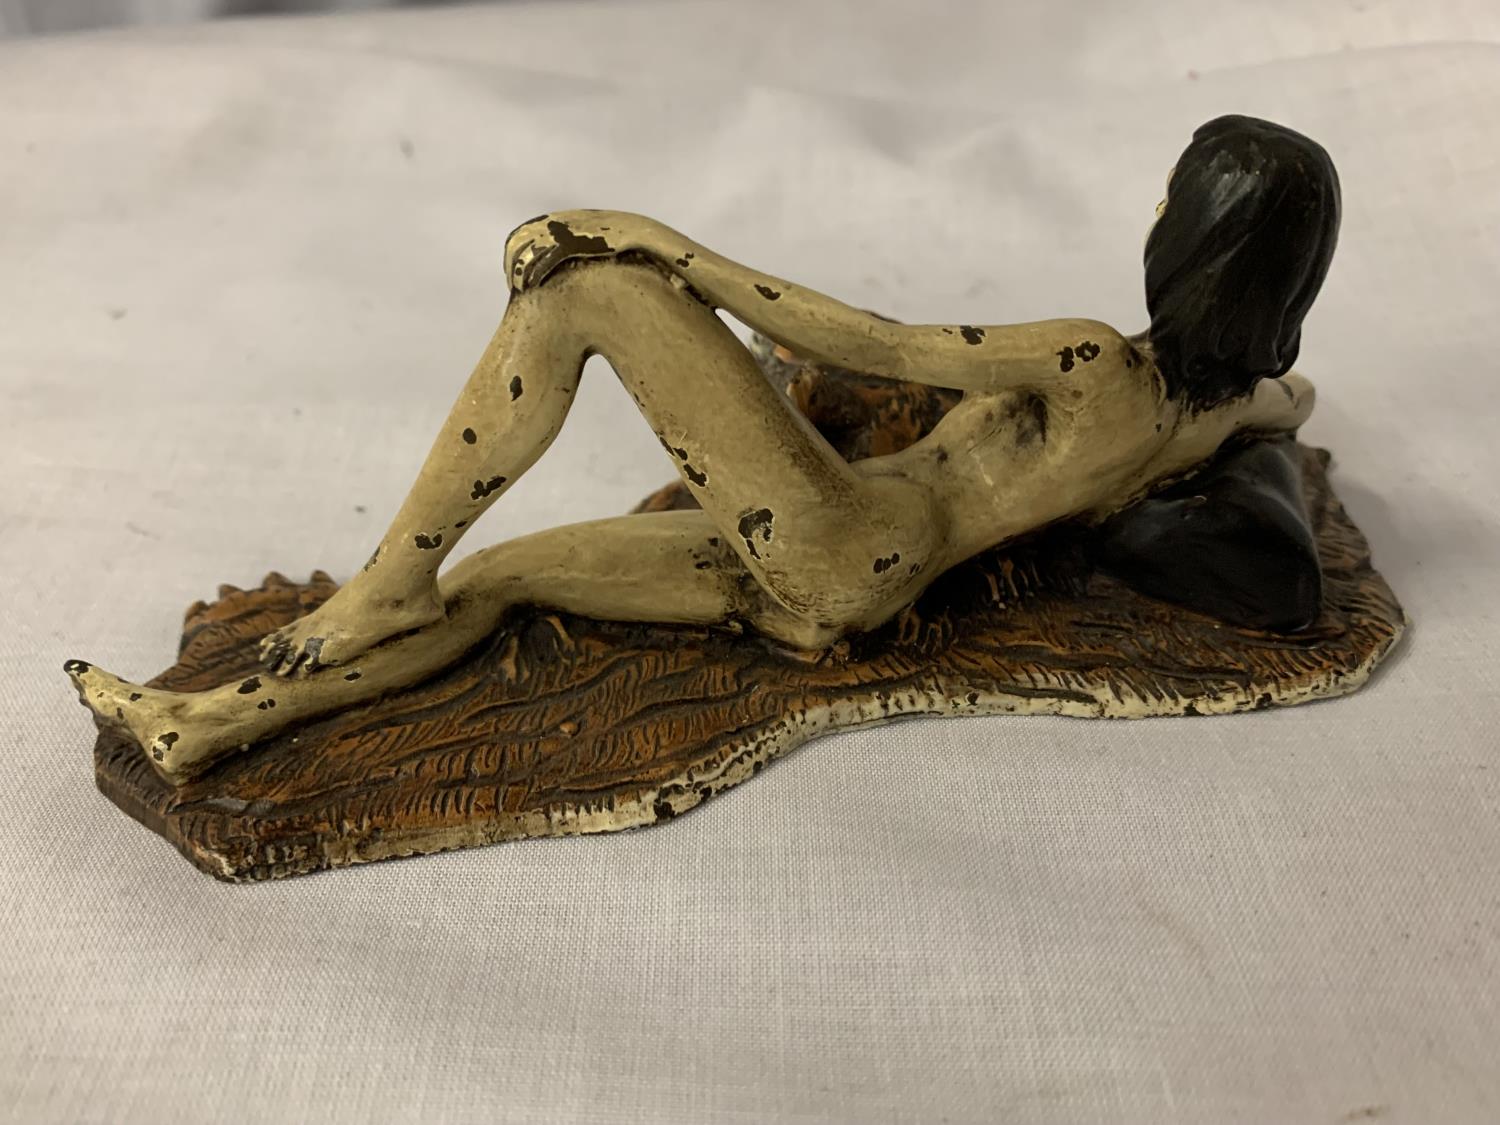 A COLD PAINTED BRONZE FIGURINE OF A NUDE LADY LYING ON A TIGER RUG - Image 2 of 3